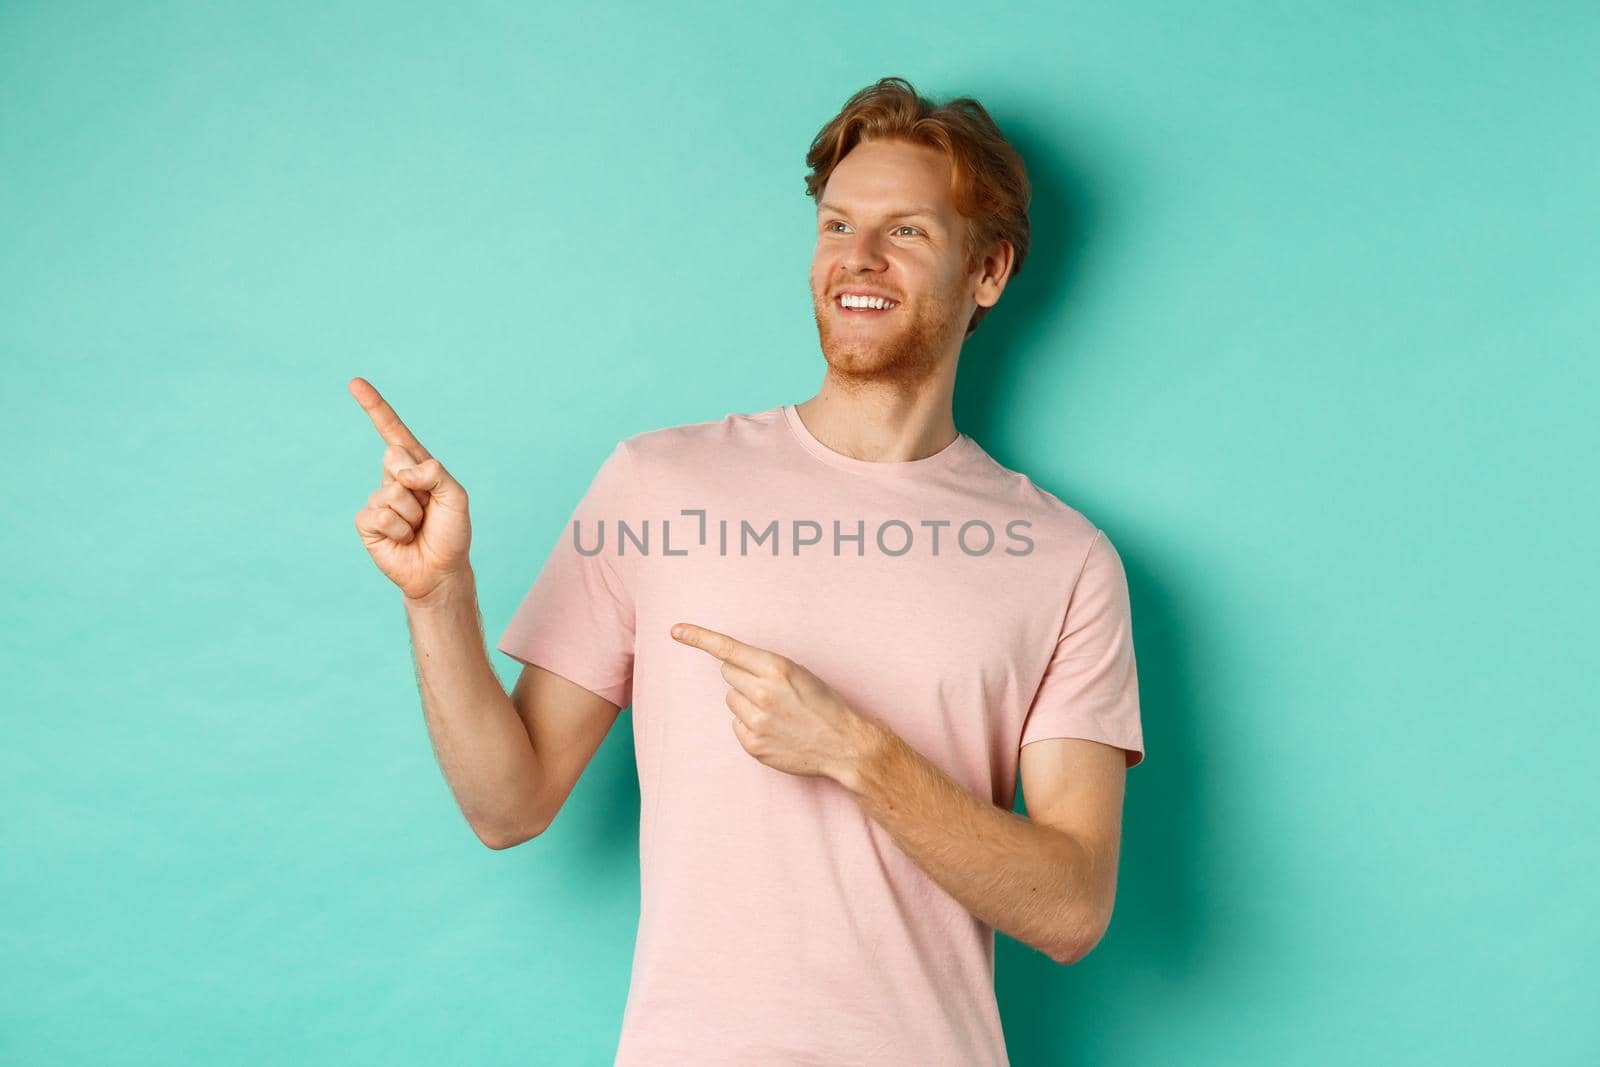 Handsome smiling man with red hair and beard looking delighted, pointing at upper left corner banner, standing in t-shirt over mint background.